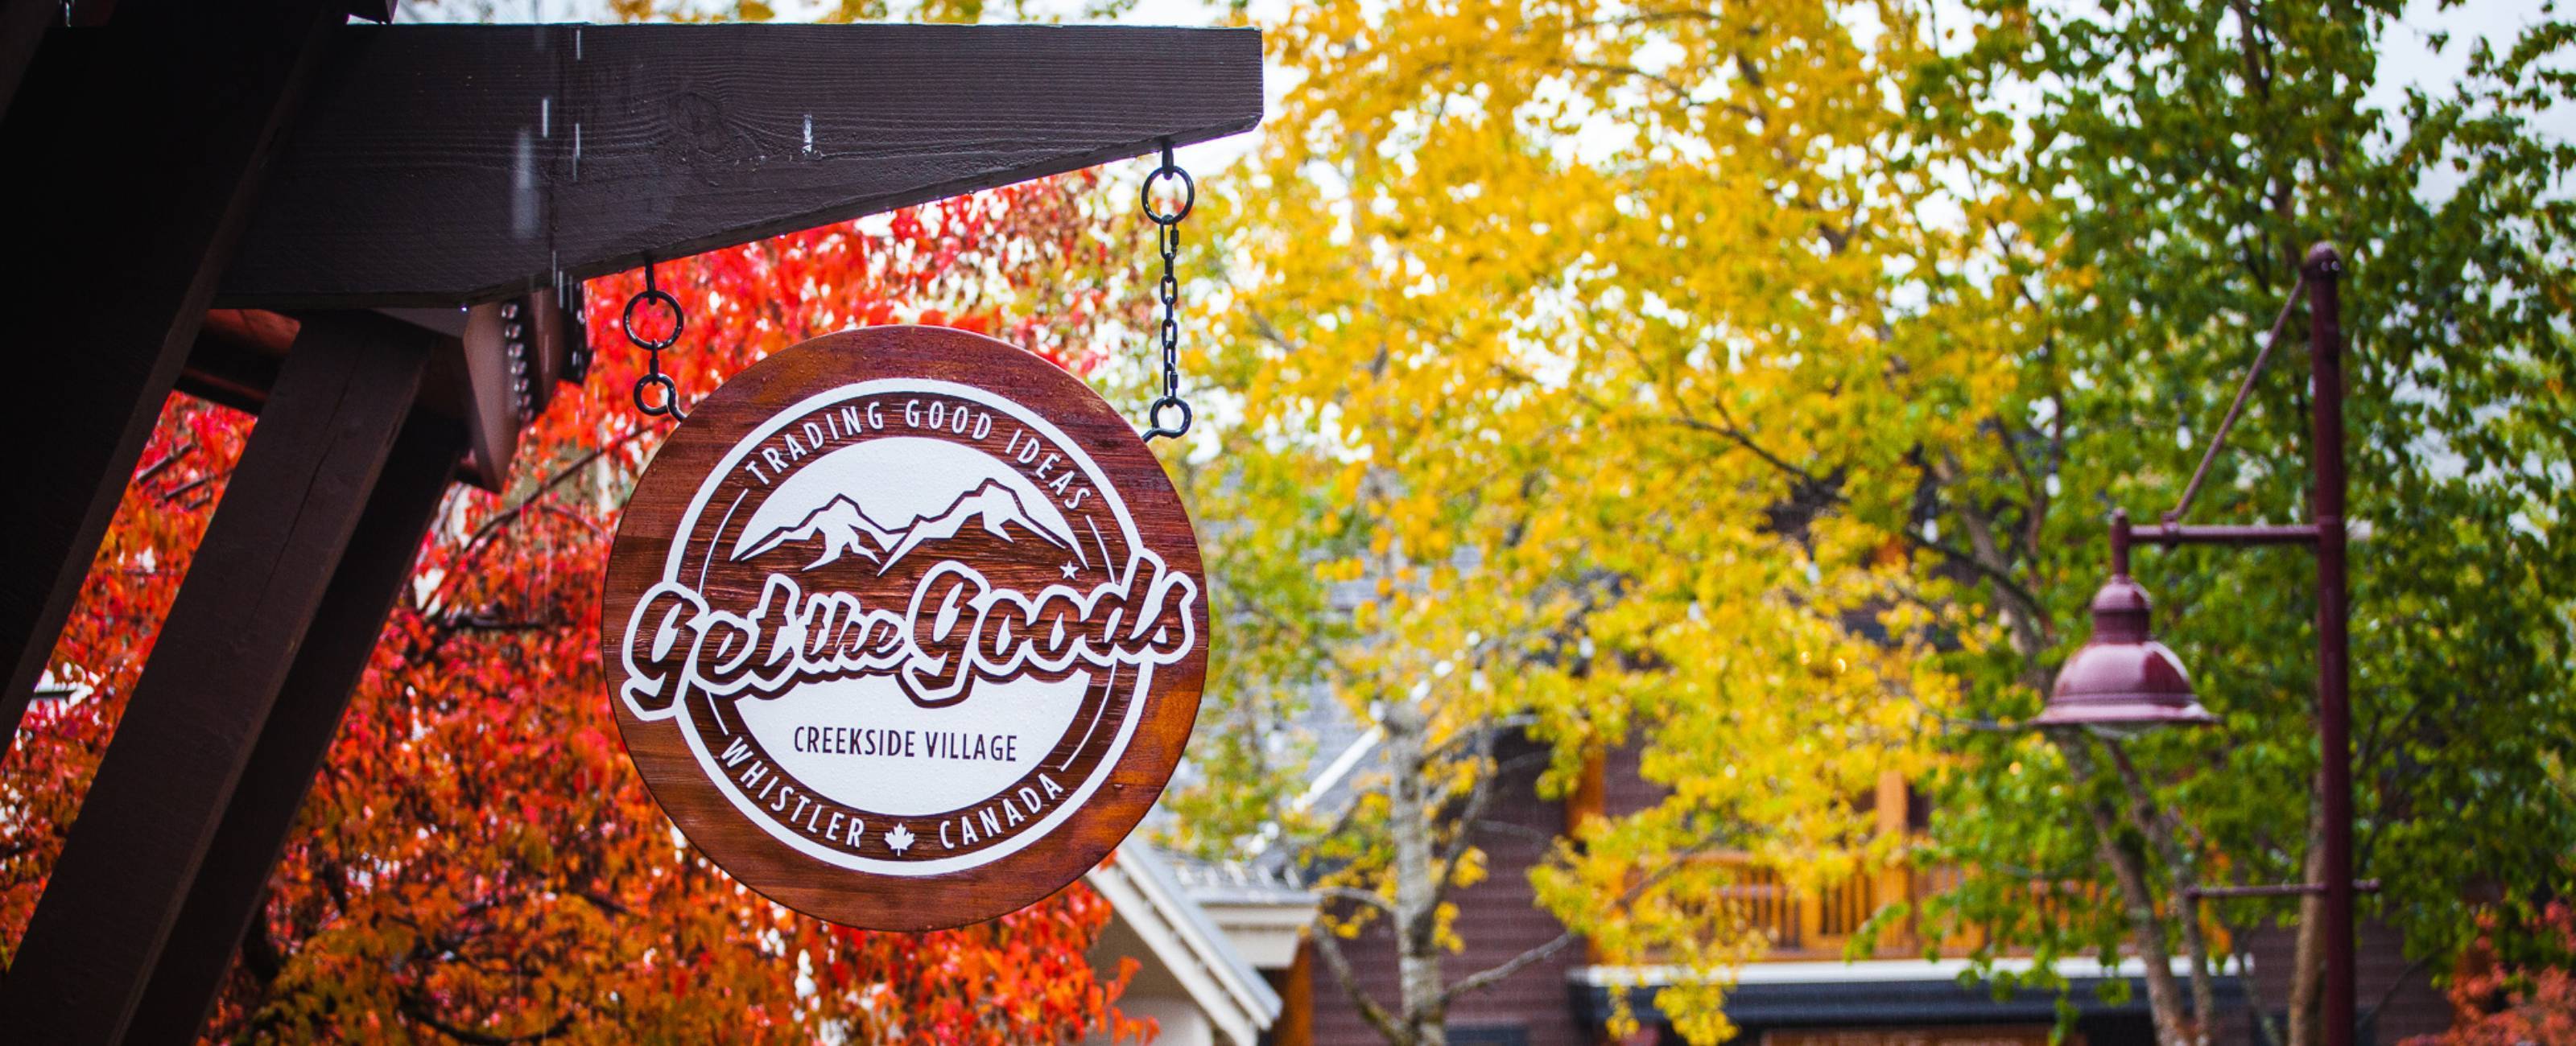 <h1>Get the Goods - Gift Shop in Whistler, BC</h1>